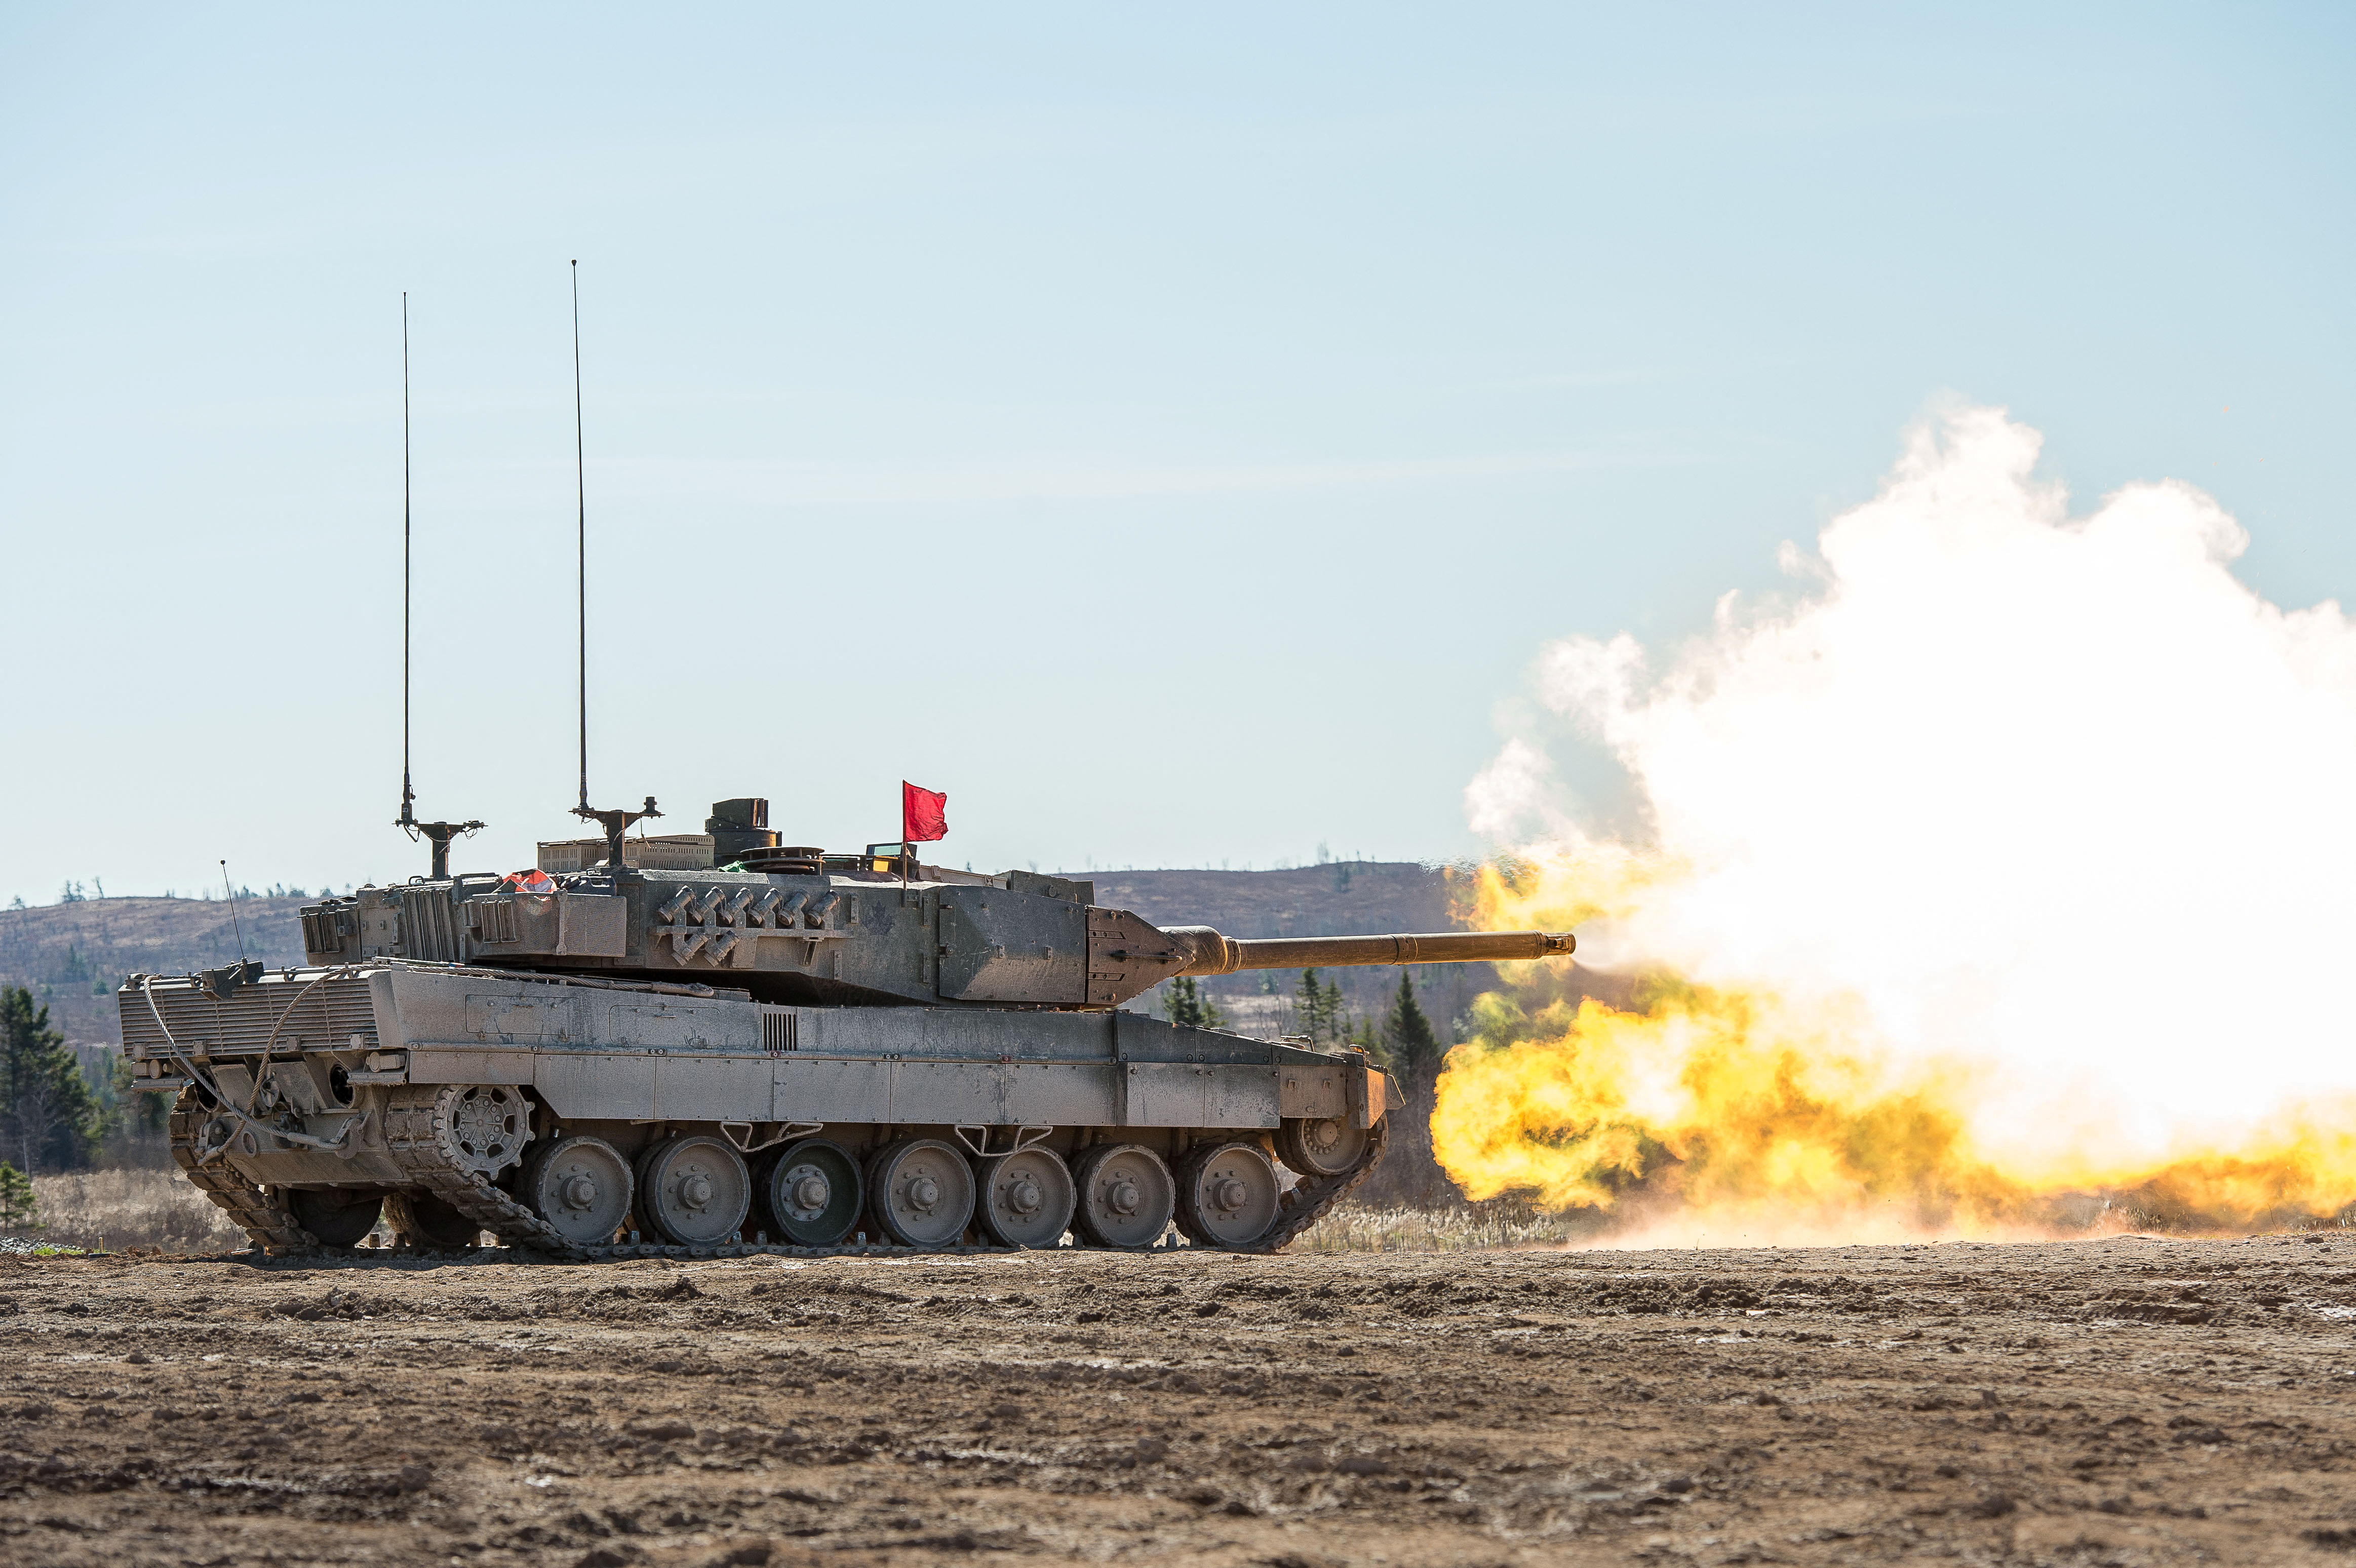 Members of the Royal Canadian Armoured Corps School (RCACS) practice their shooting skills from a Leopard II tank at firing point 4 in the training areas at the 5th Canadian Division Support Group (5 CDSG) Gagetown, in Oromocto